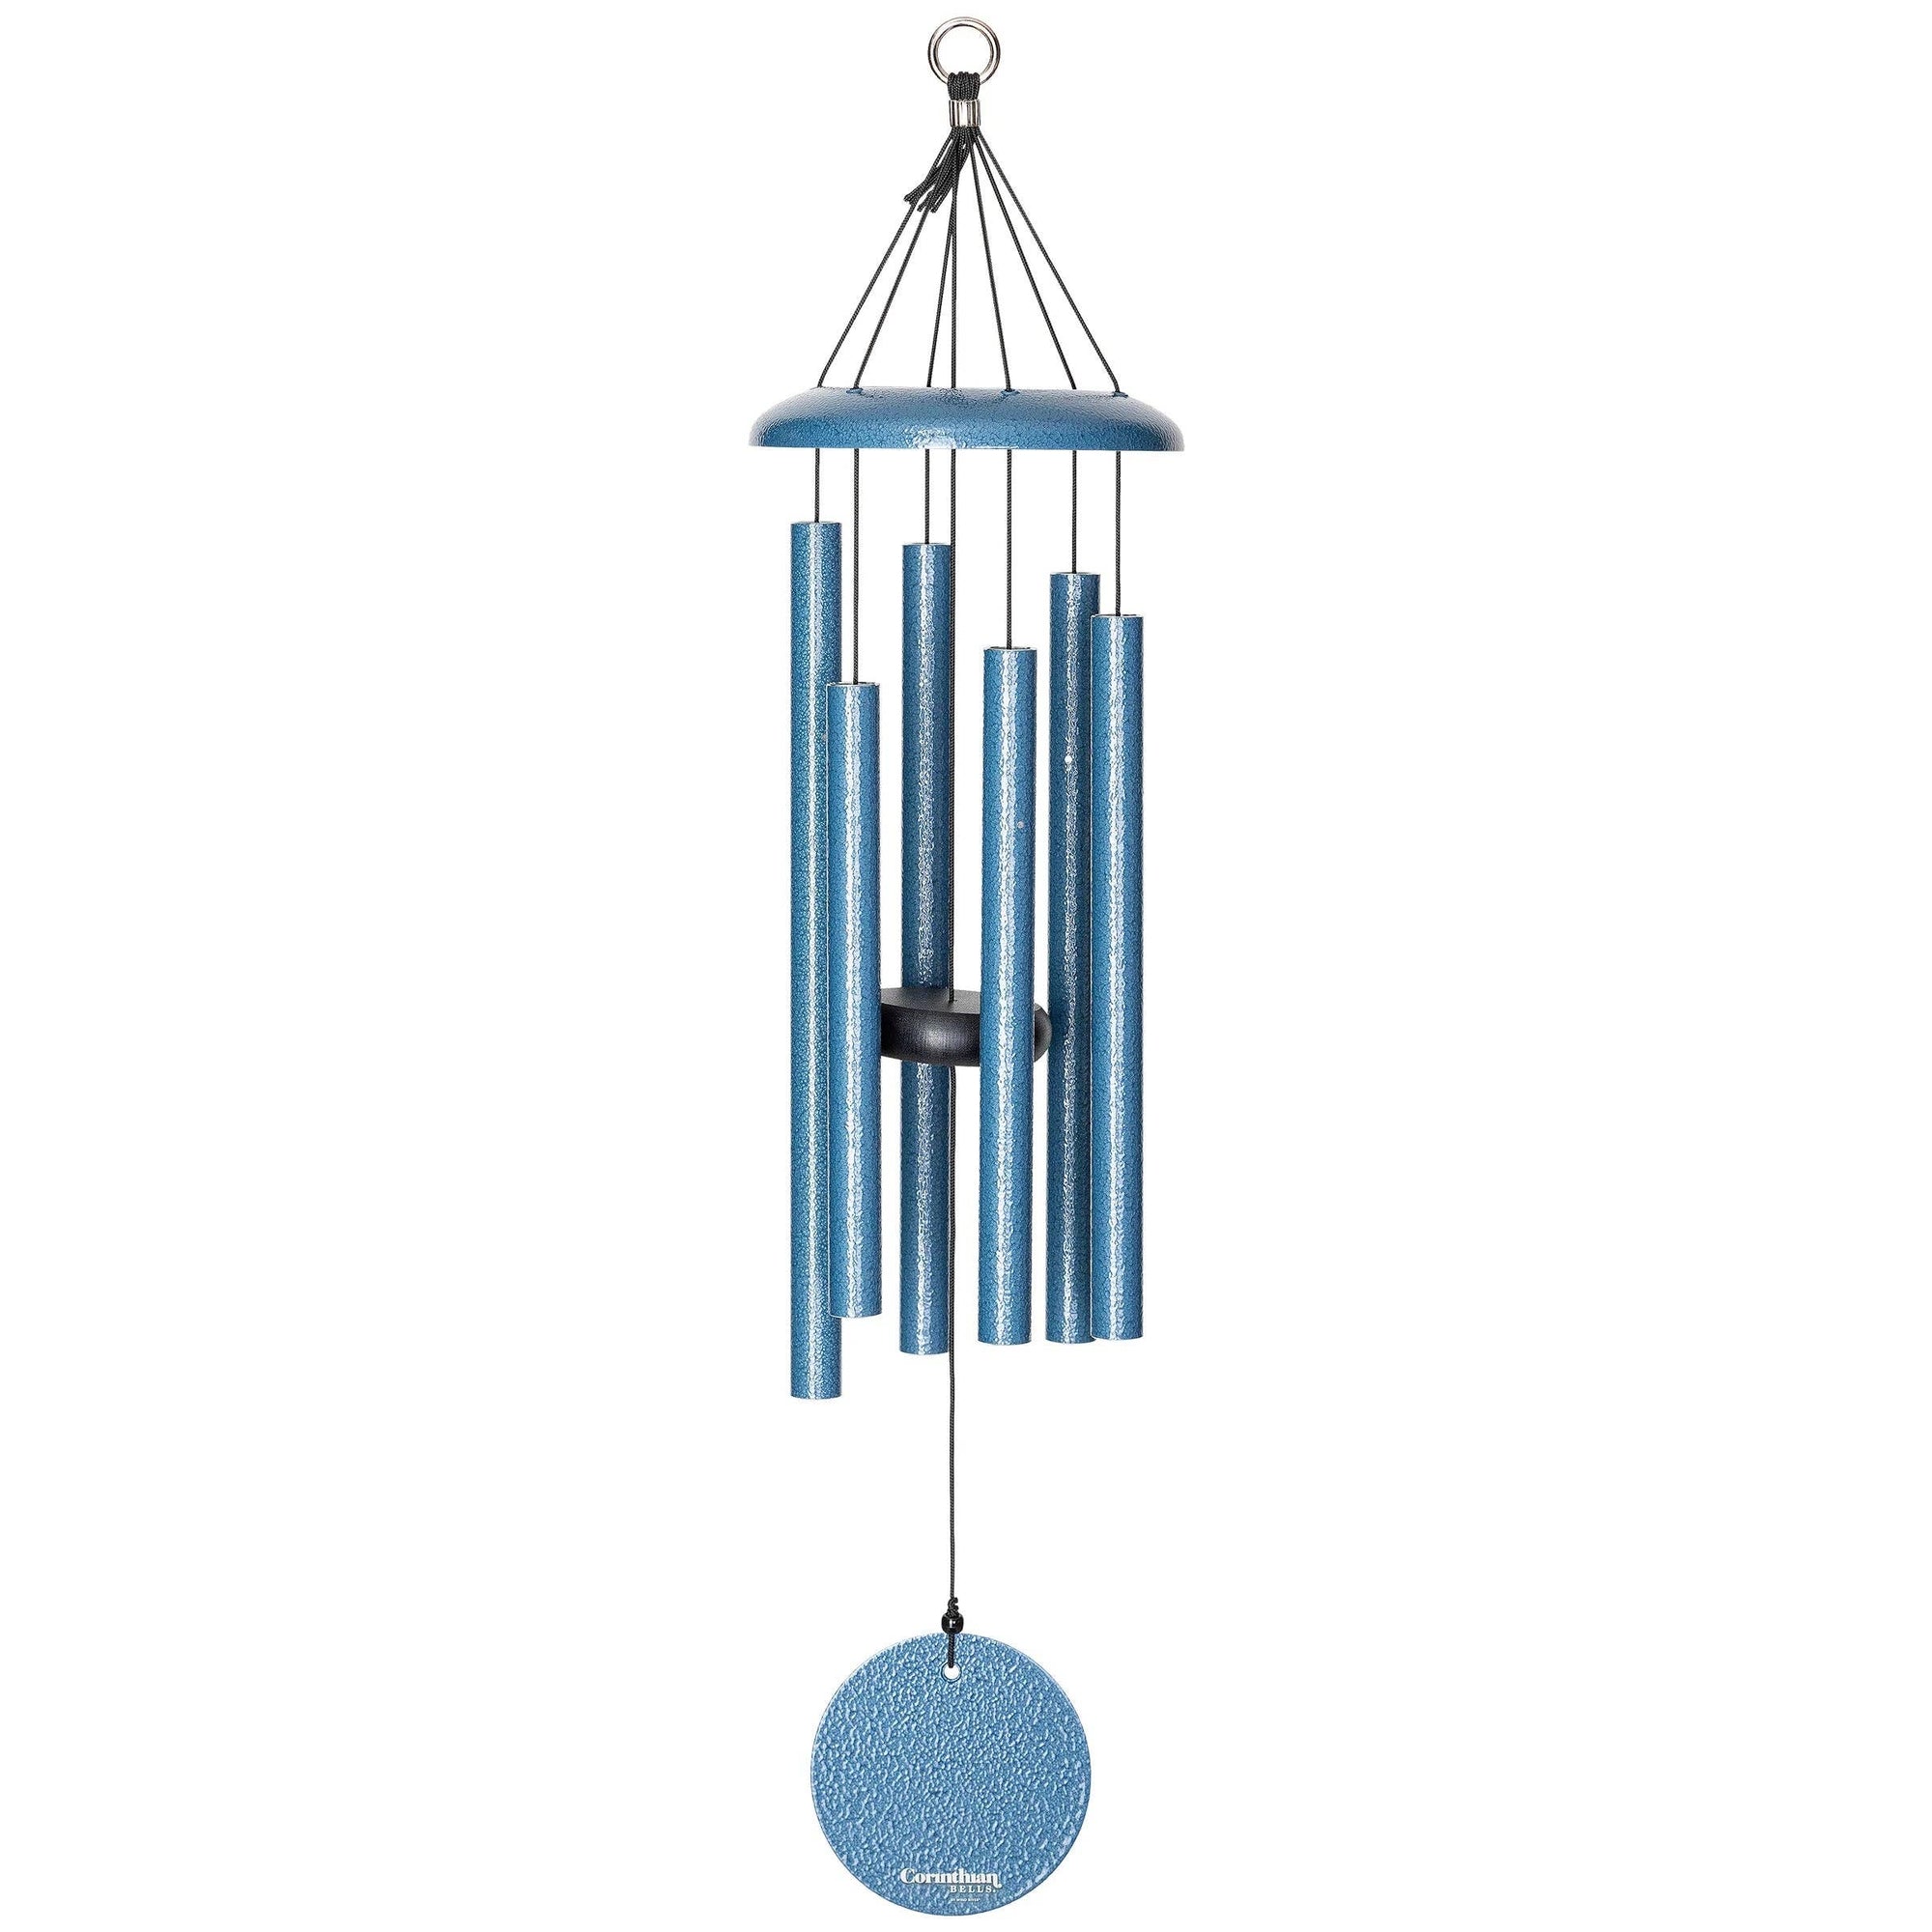 A 27" Windchime Corinthian Bells® hanging on a white background, perfect for budget-friendly decor.